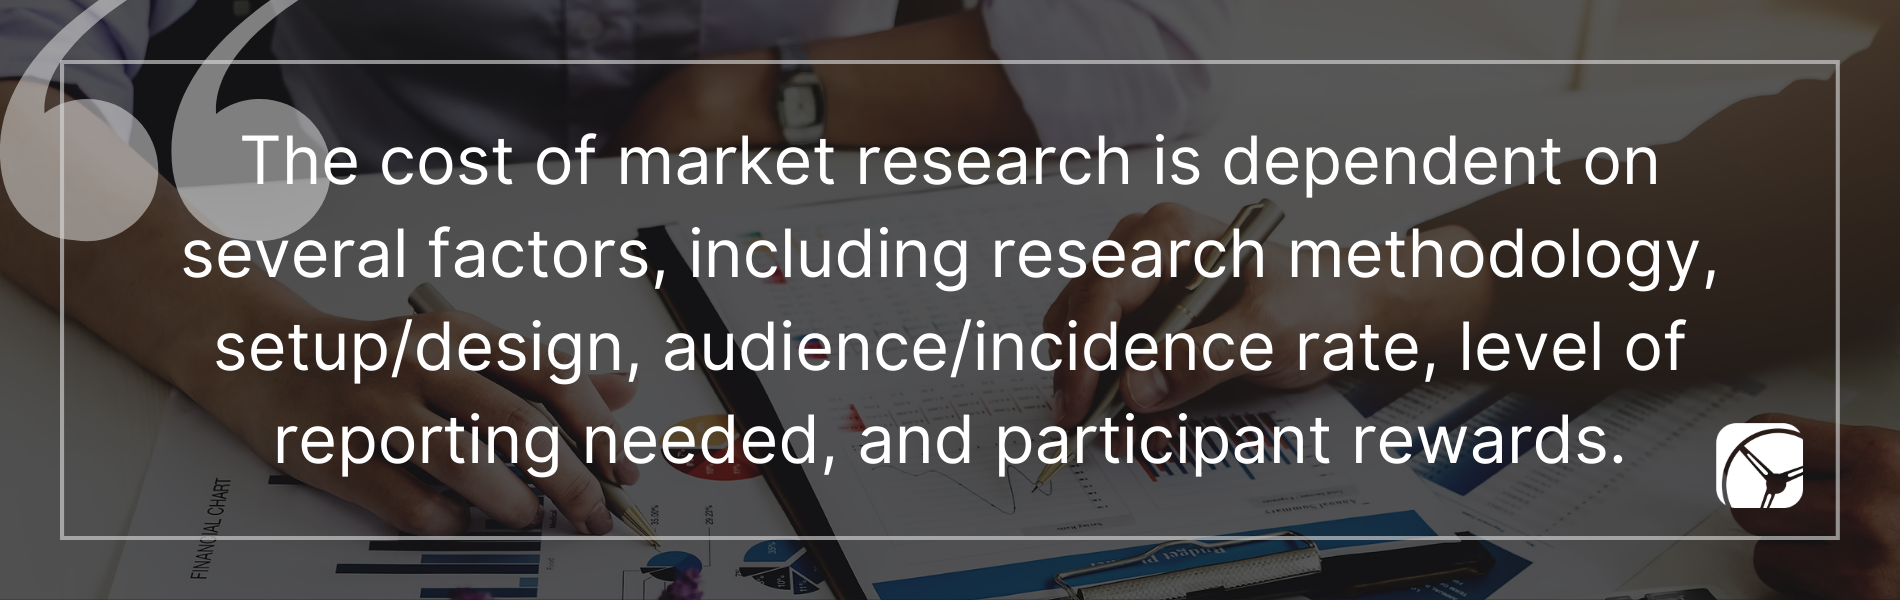 The cost of market research is dependent on several factors, including research methodology, setup/design, audience/incidence rate, level of reporting needed, and participant rewards.